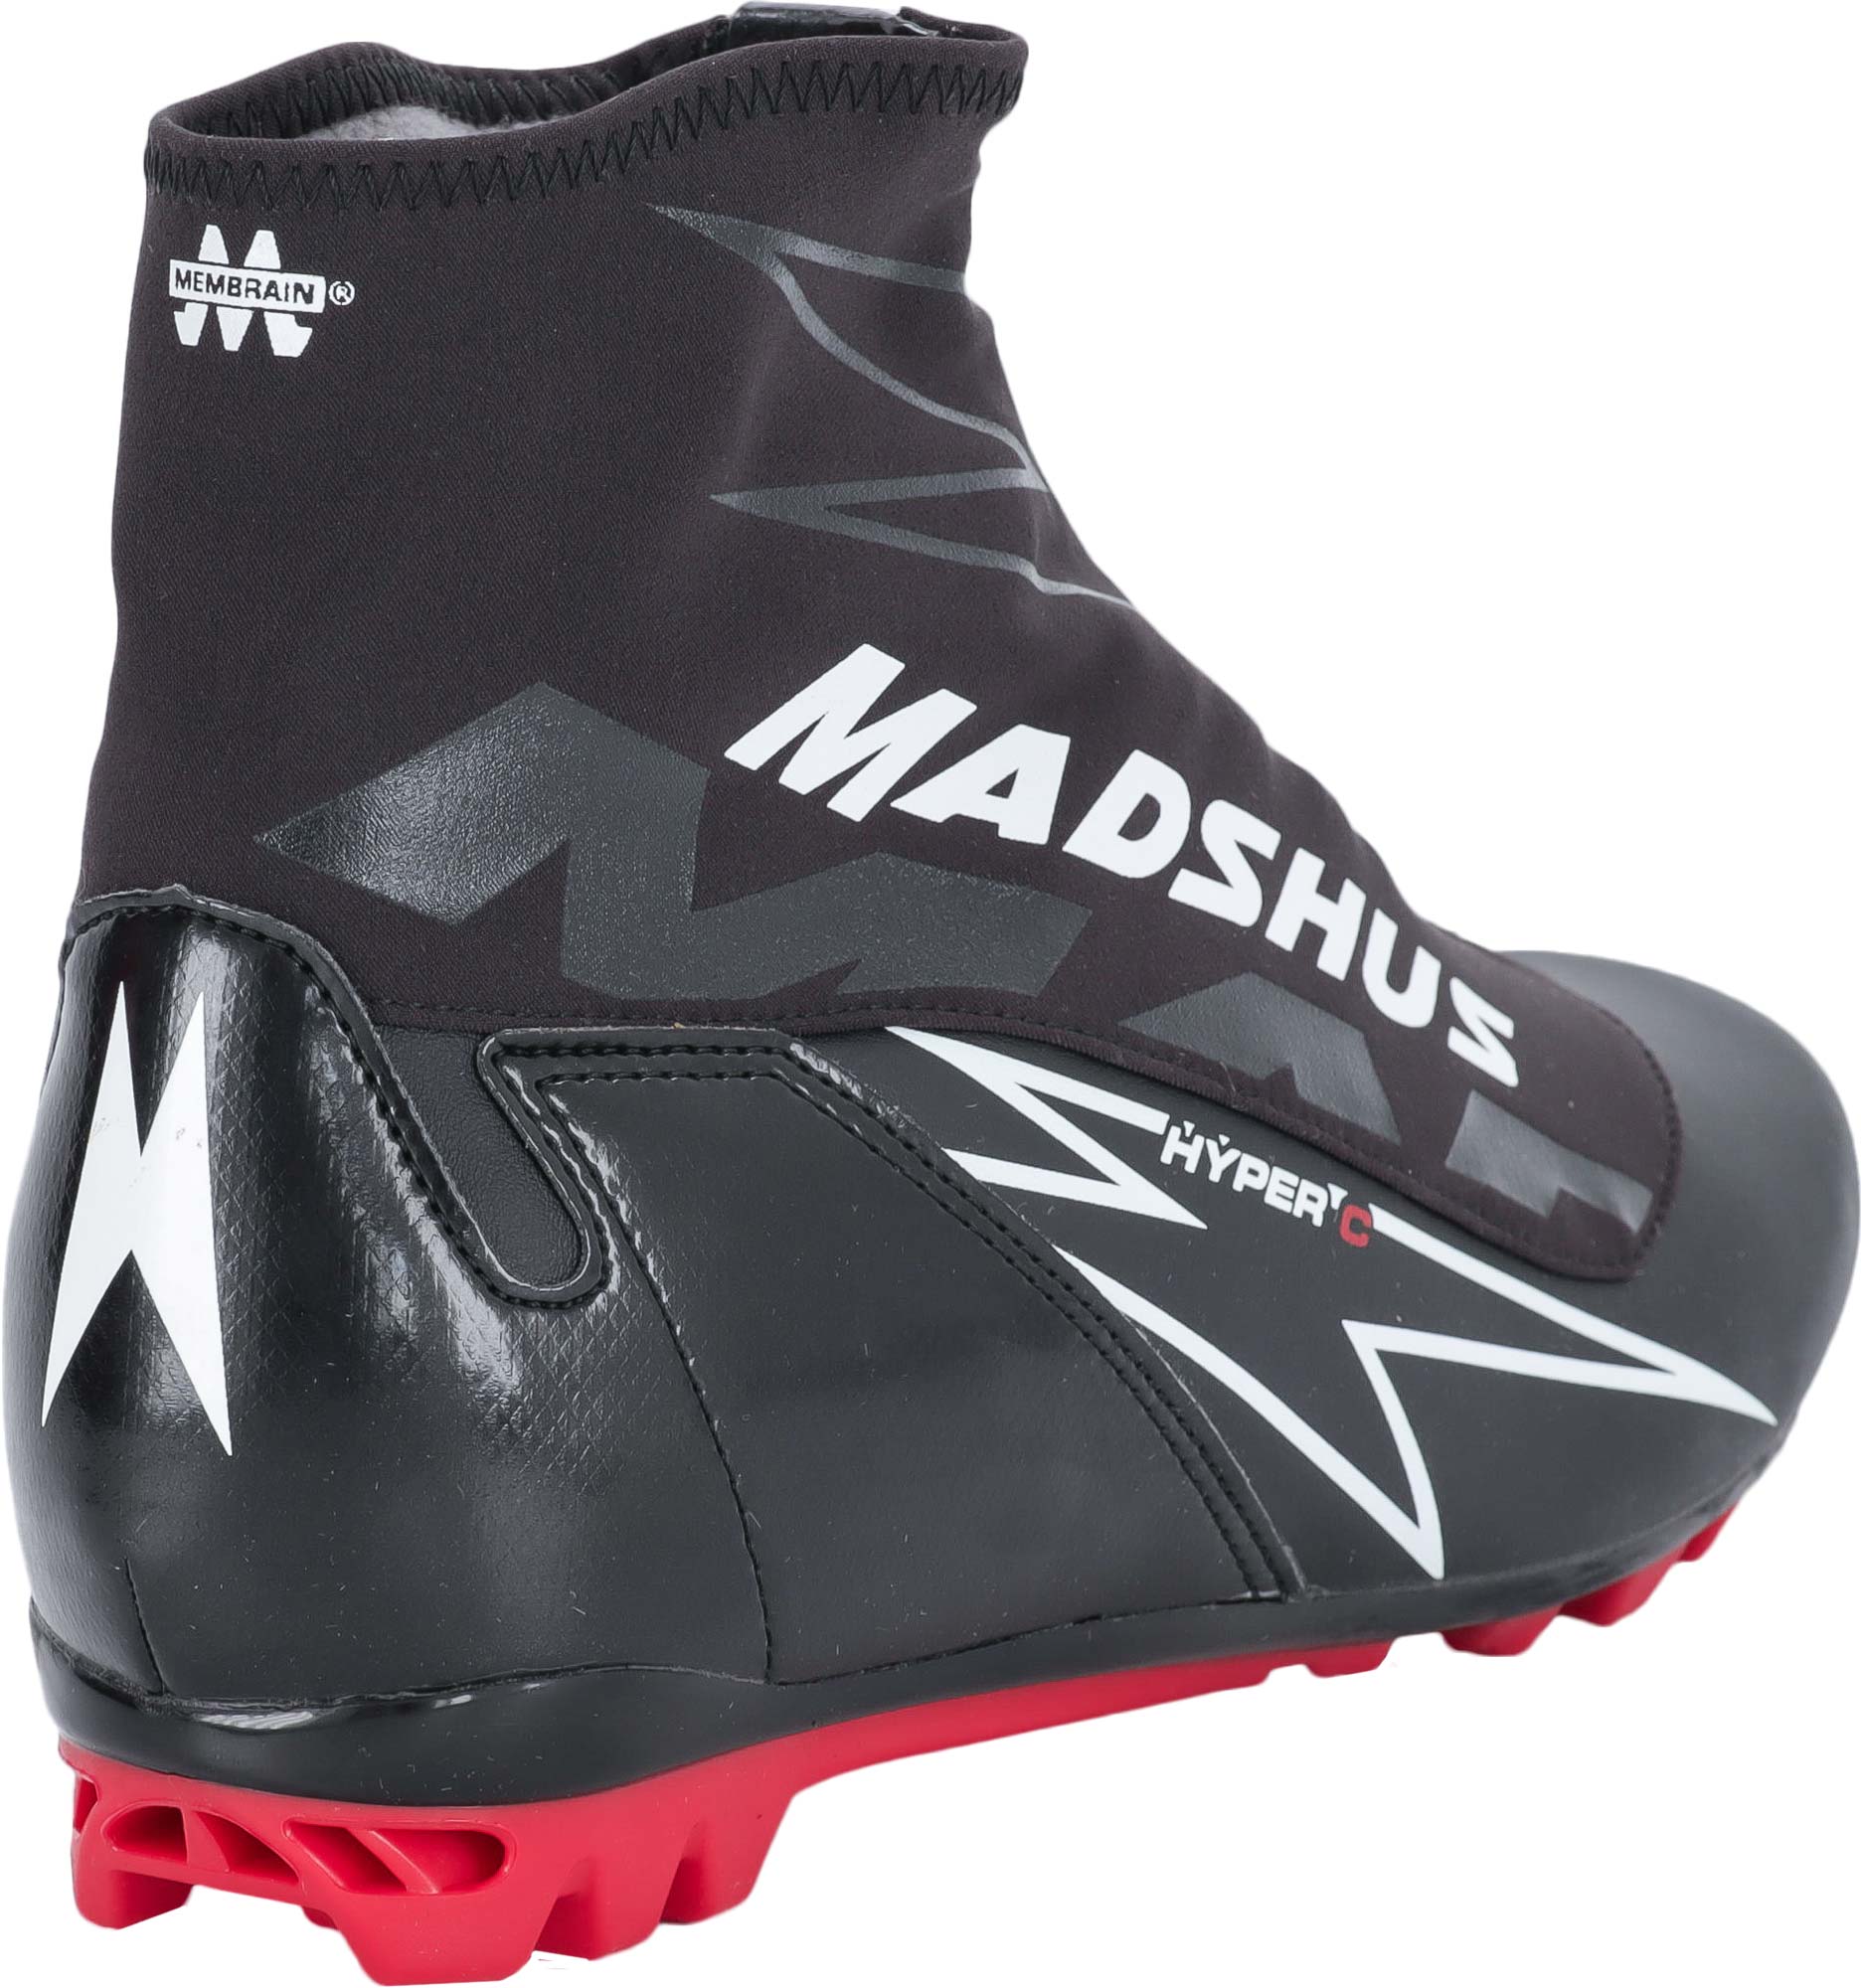 Nordic ski boots for classic style